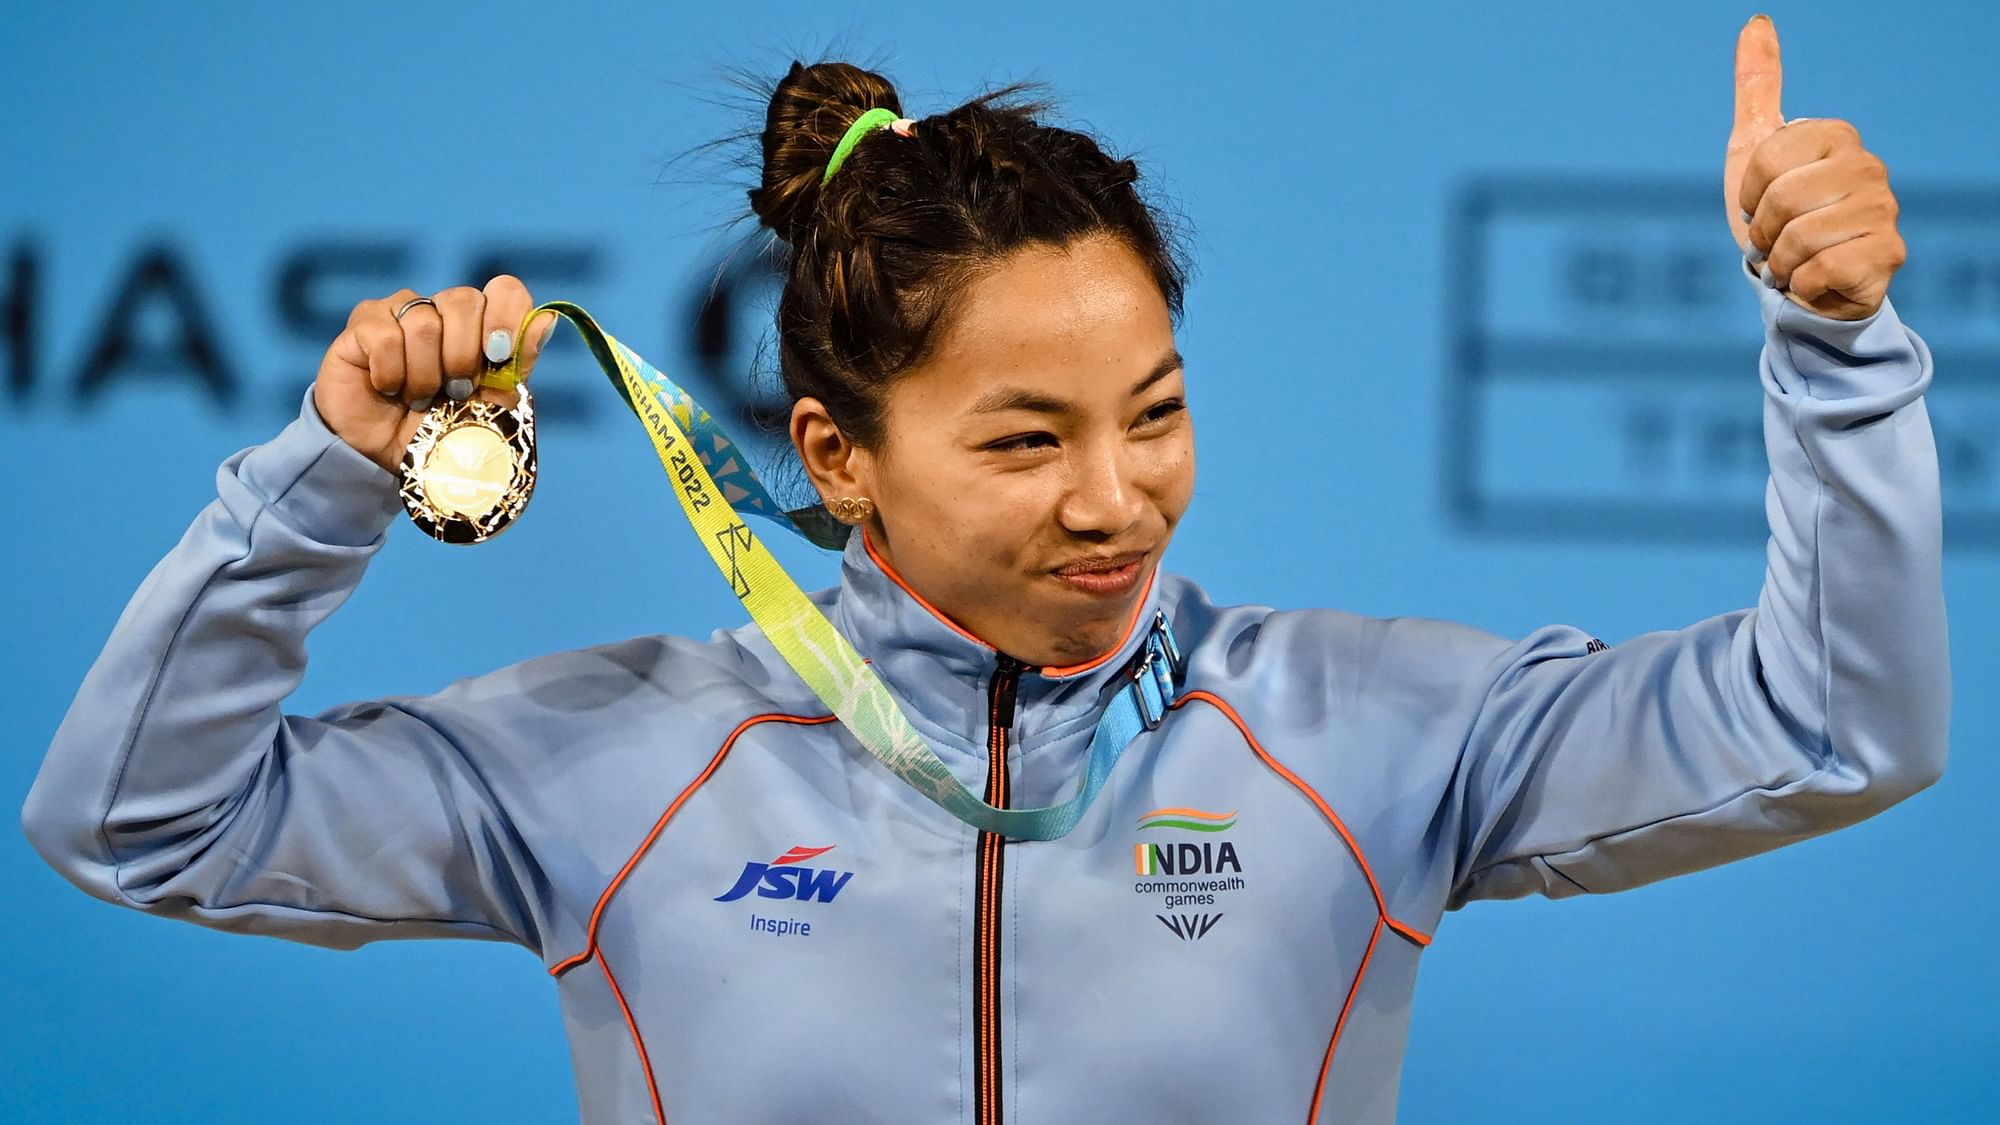 Commonwealth Games 2022 CWG 2022 Mirabai Chanu Sets New Games Record, Wins India Its First Gold Medal